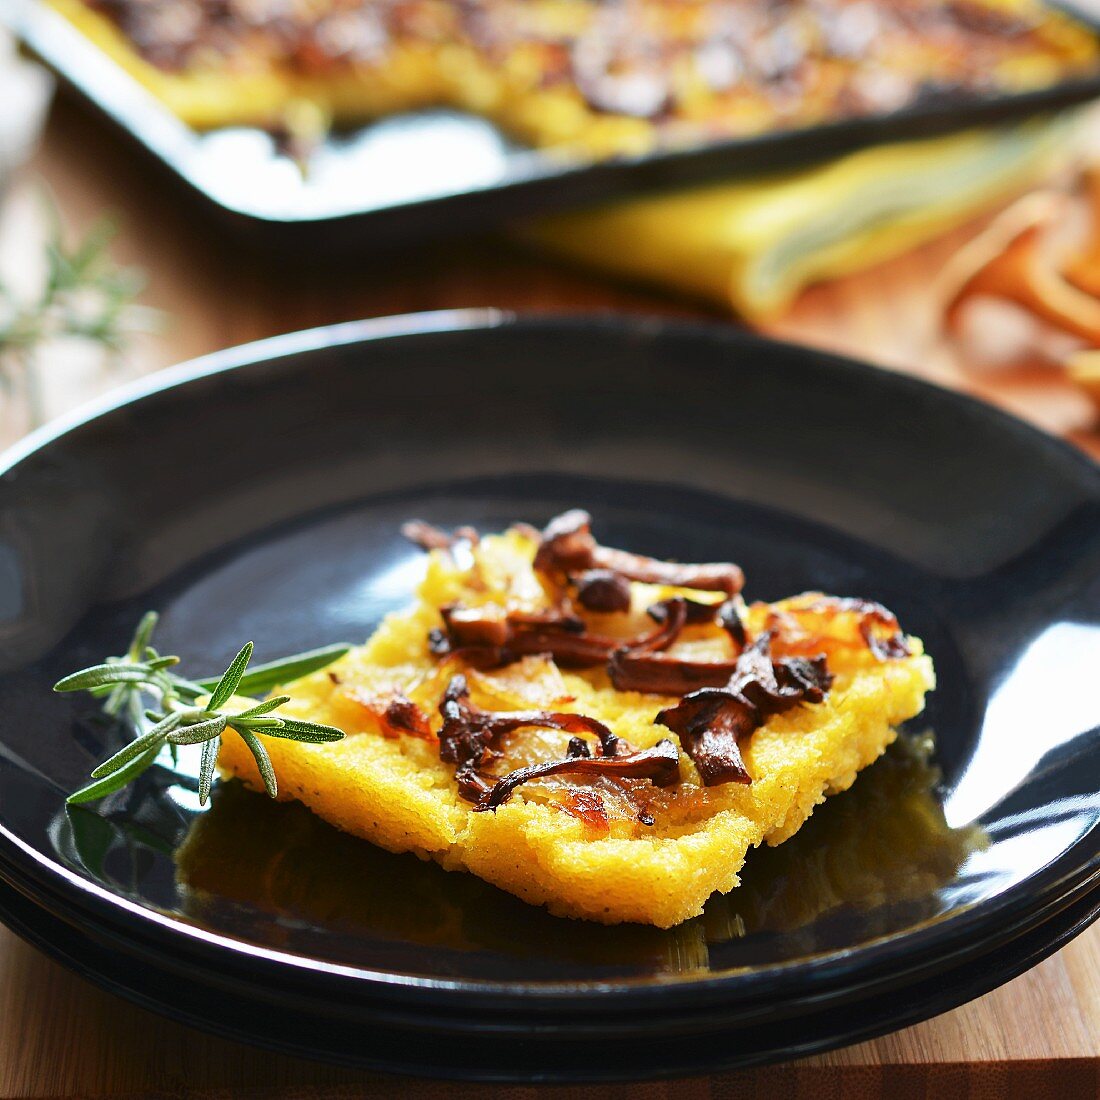 A slice of polenta cake with chanterelle mushrooms and onions on a plate in front of a baking tray